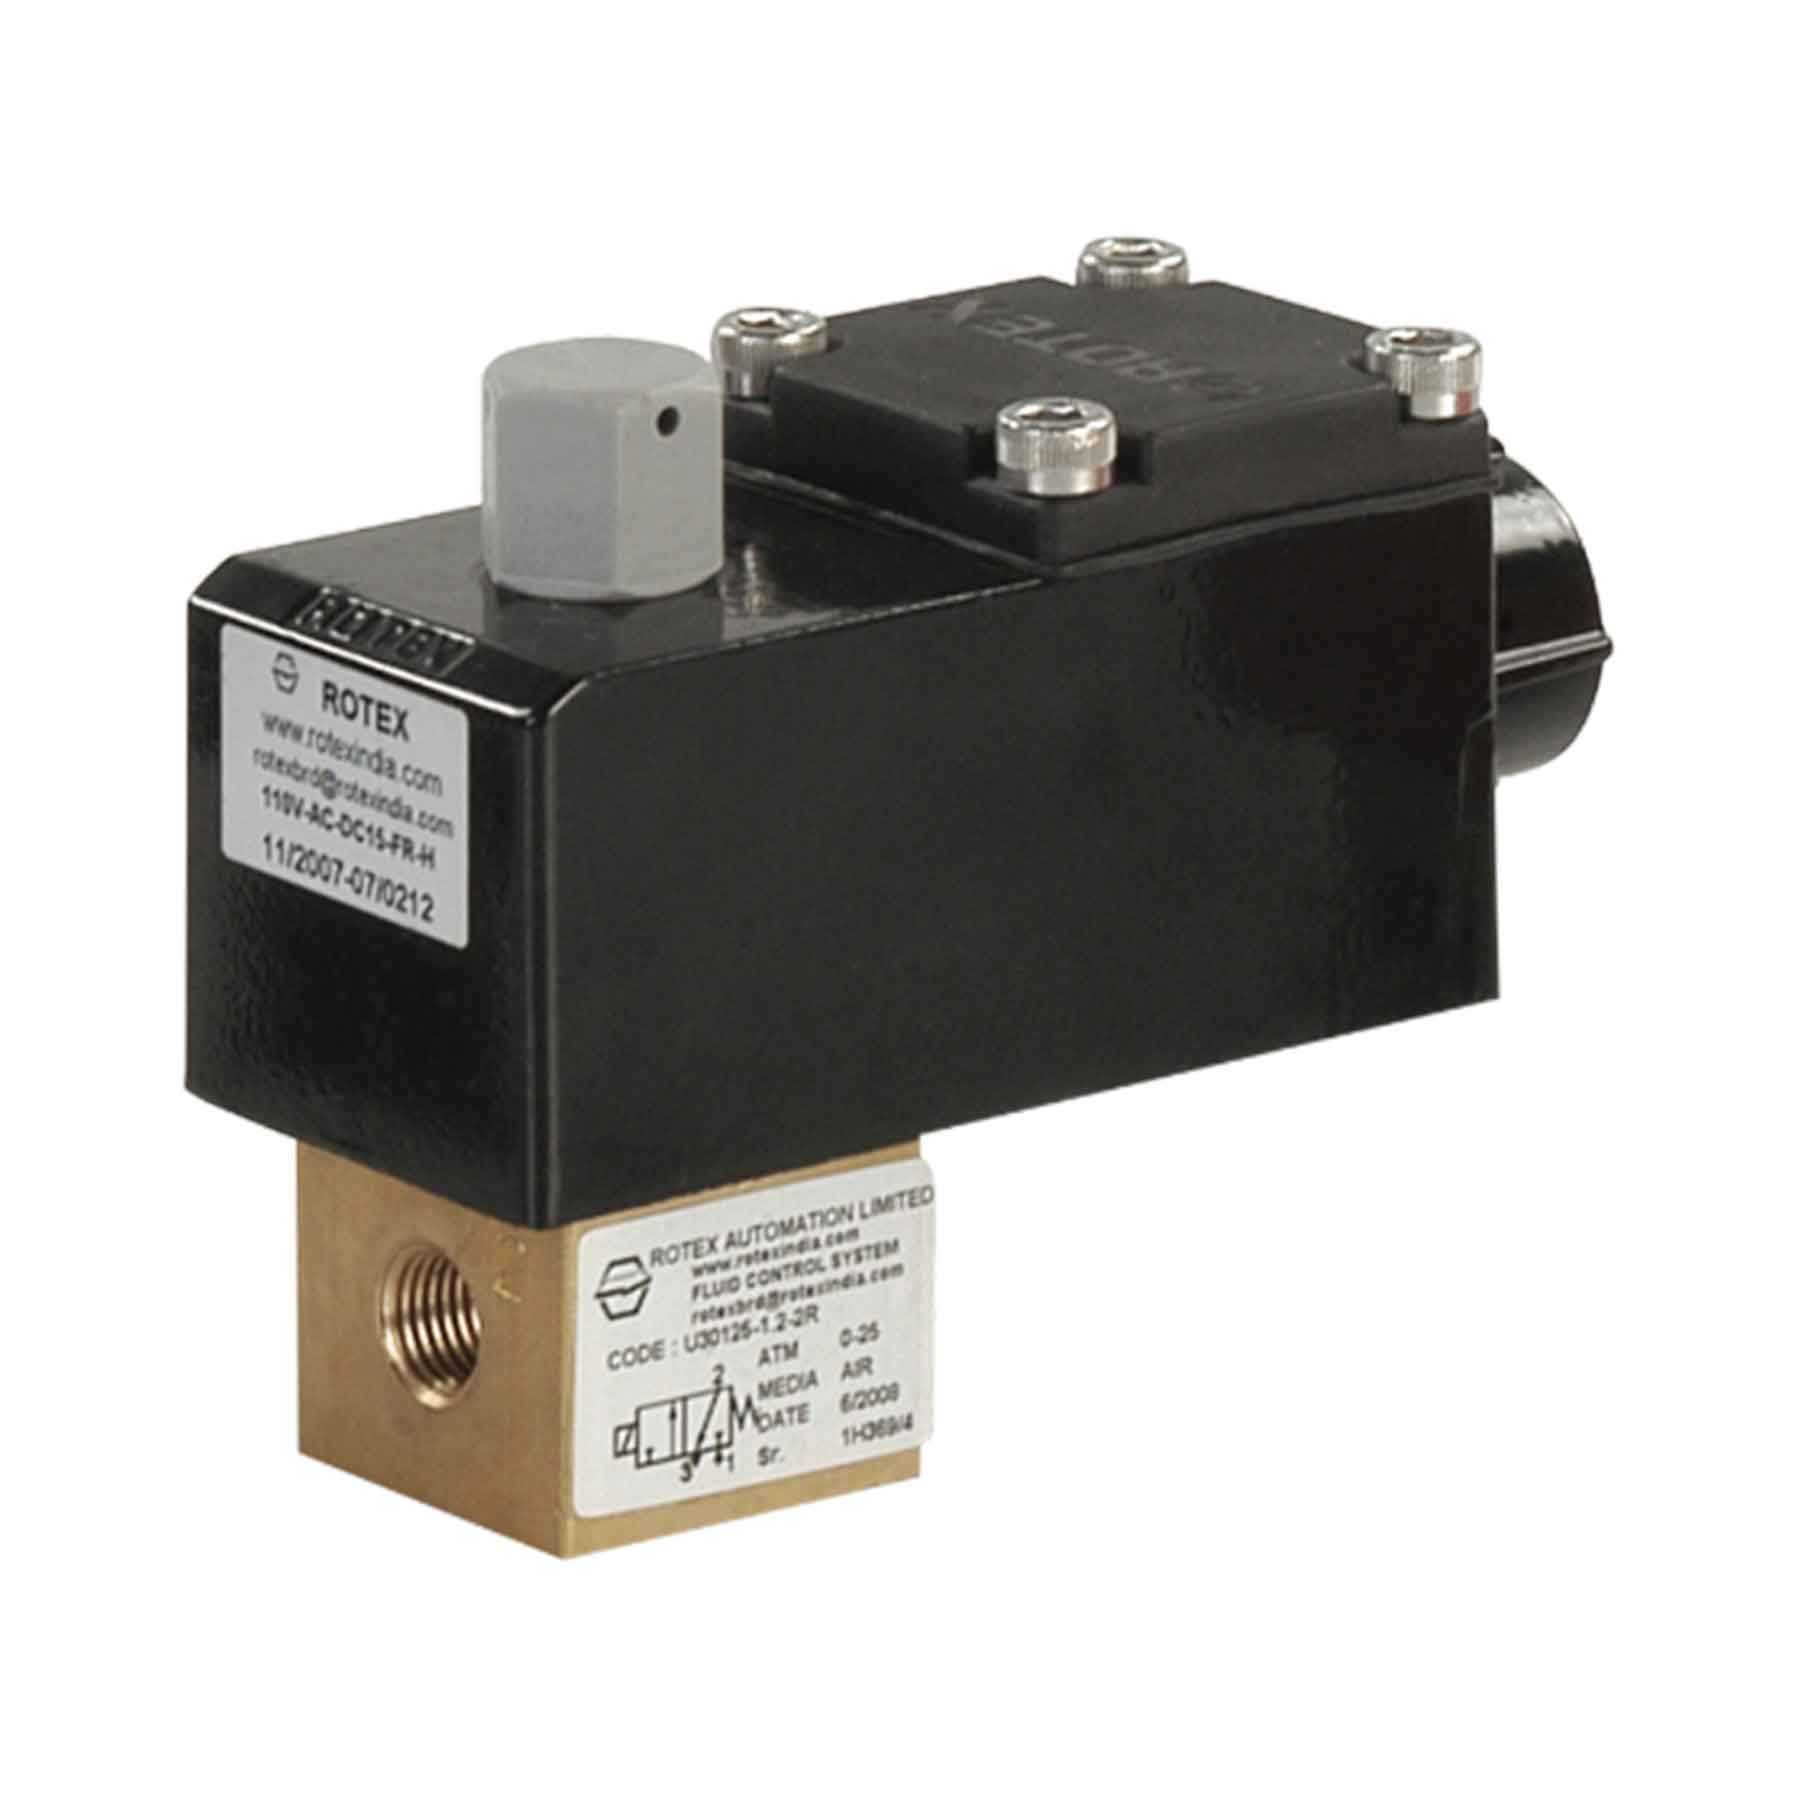 Rotex 2/2-Way Normally Closed Direct Lift Solenoid Valve 20101-2.2-2R-B5-S2+III-230V-50HZ-37-H-01